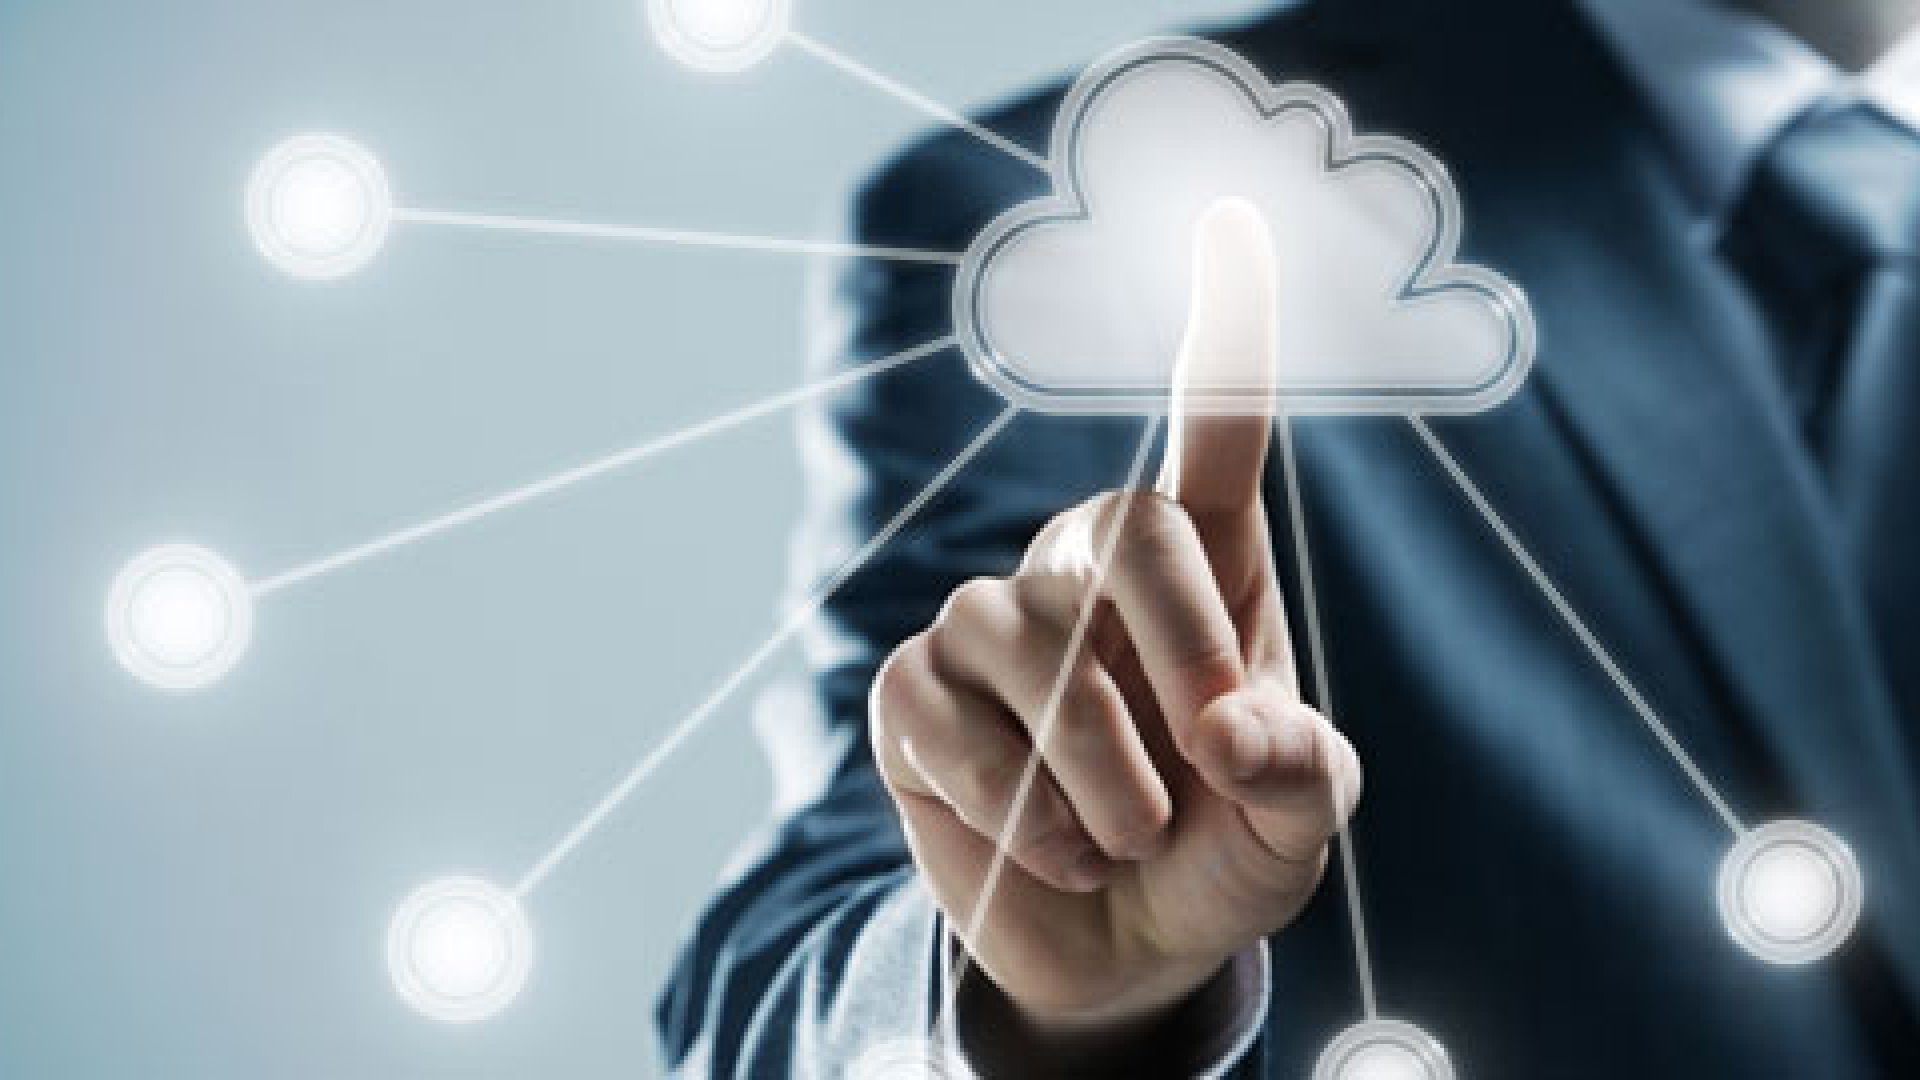 Cloud Storage: 4 Legal Issues You Need to Know